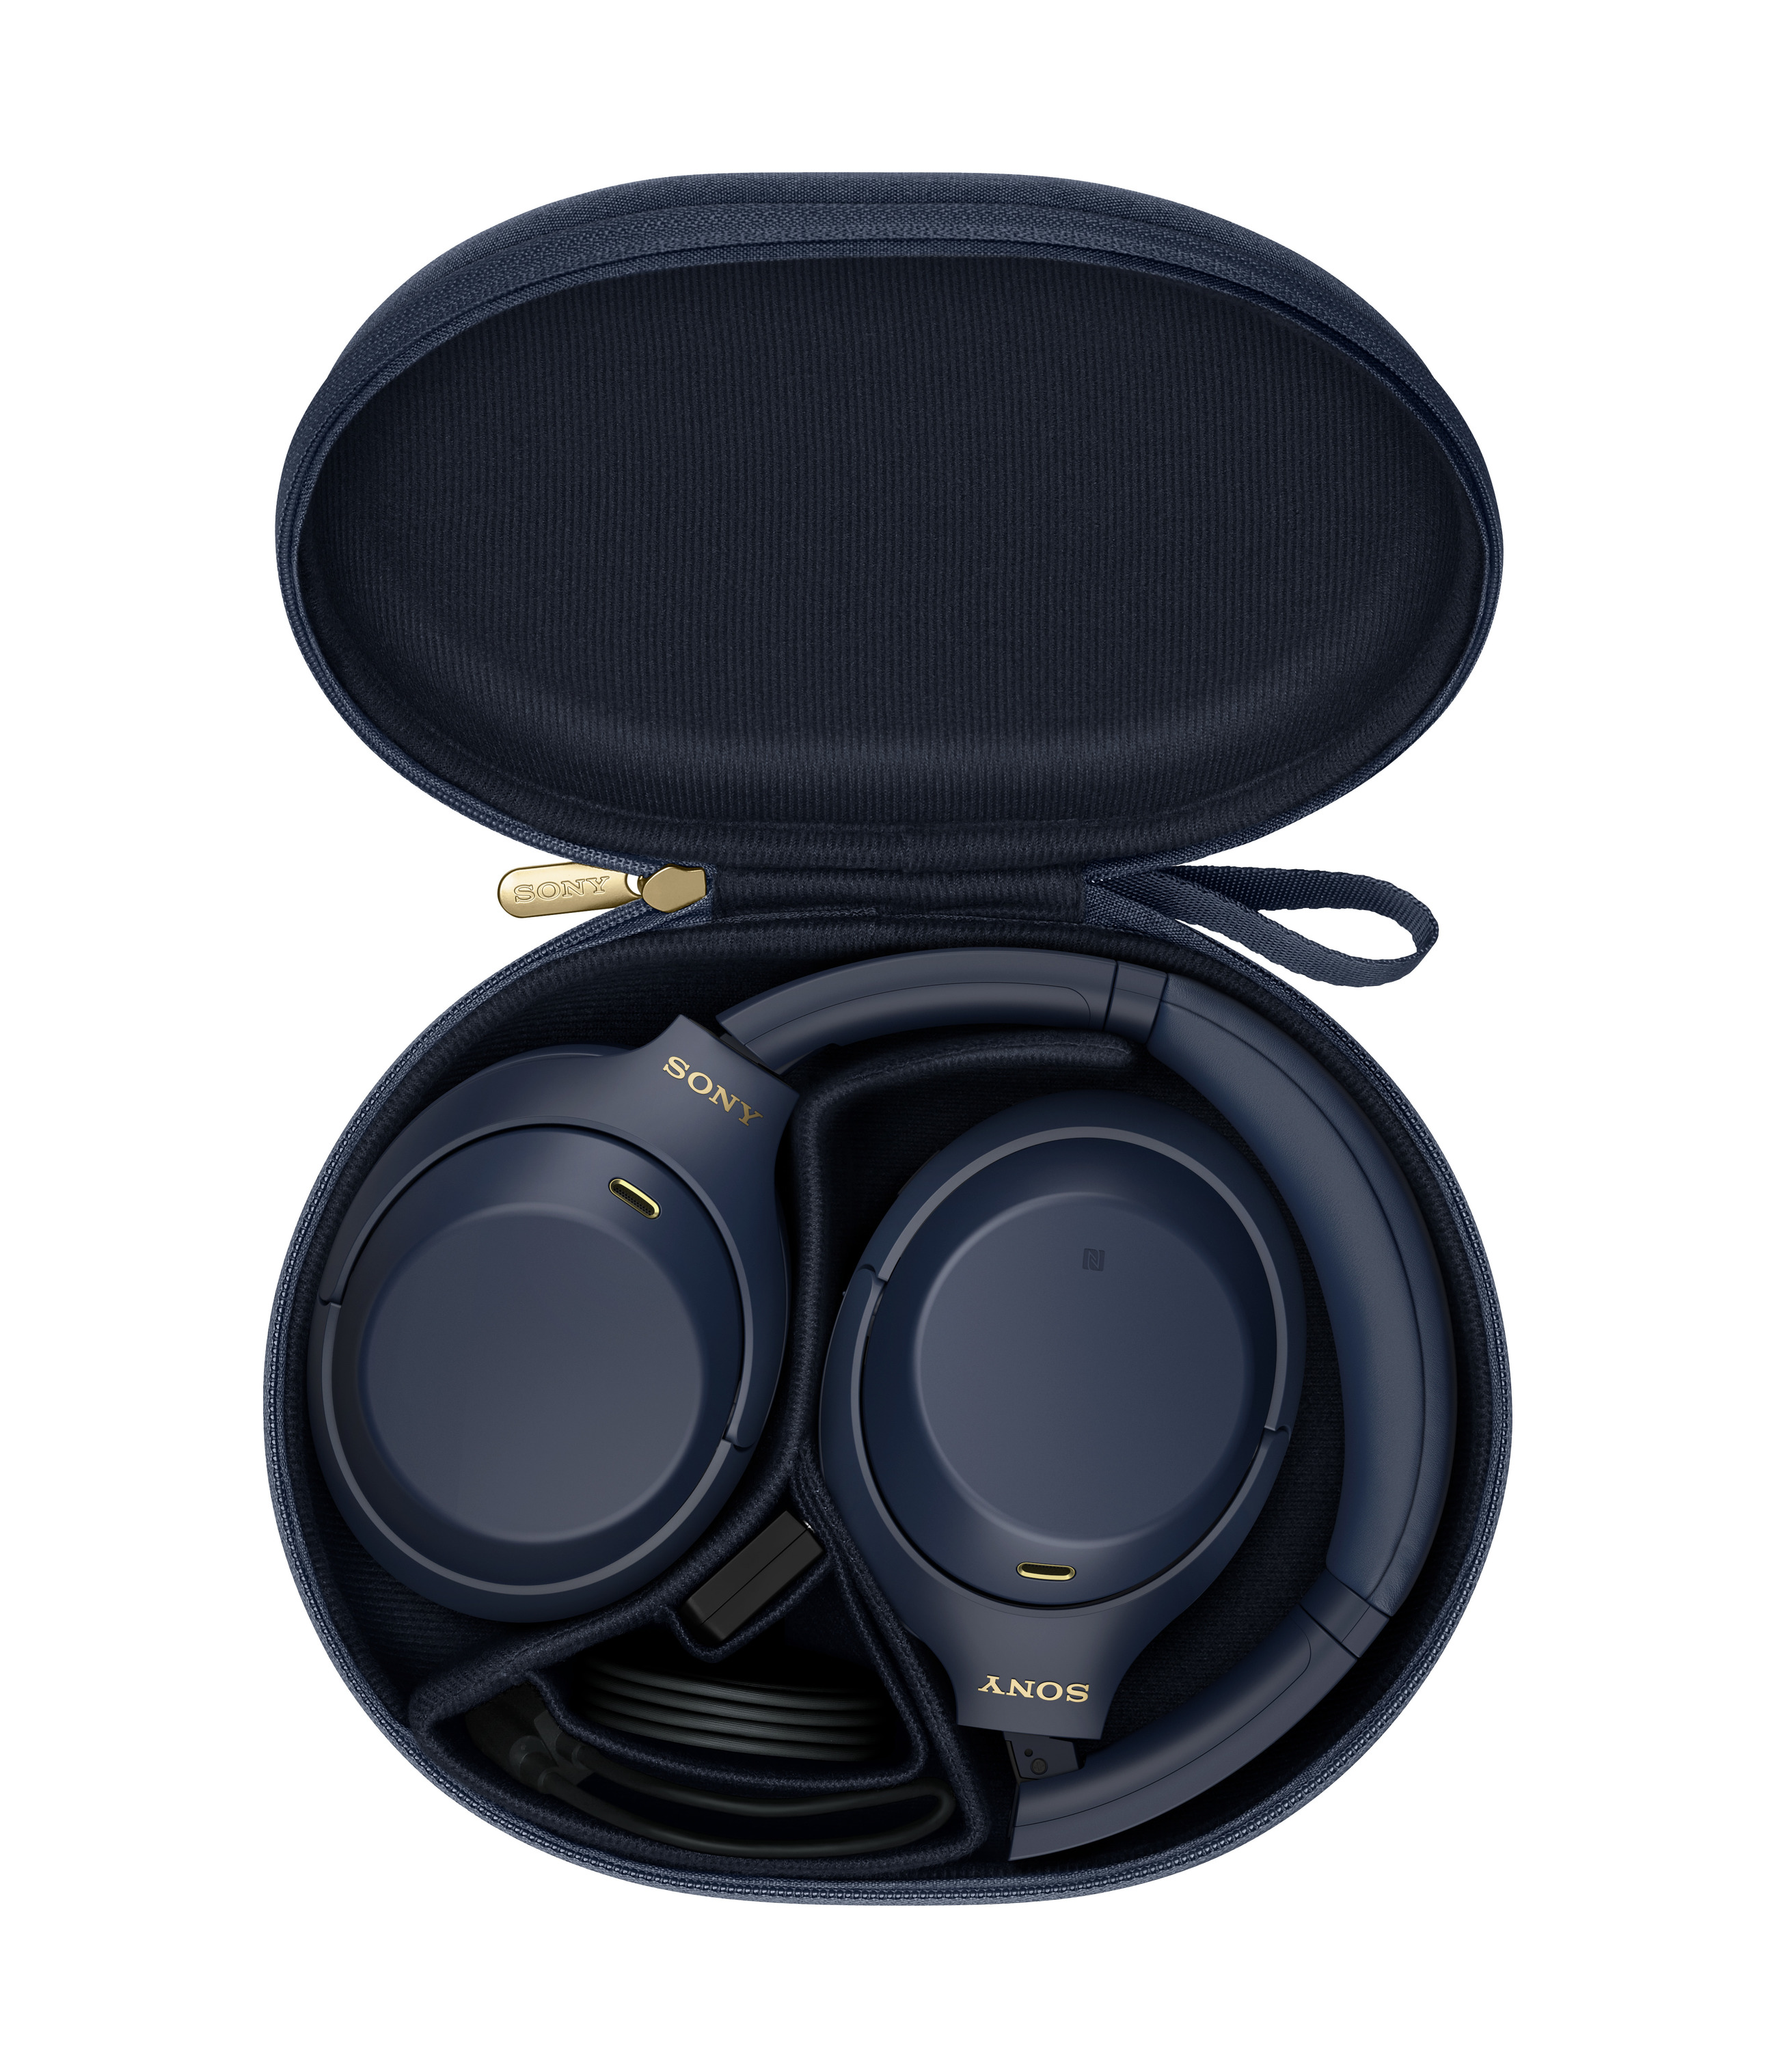 Sony refreshes the WH-1000XM4 in a Midnight Blue colourway -   News